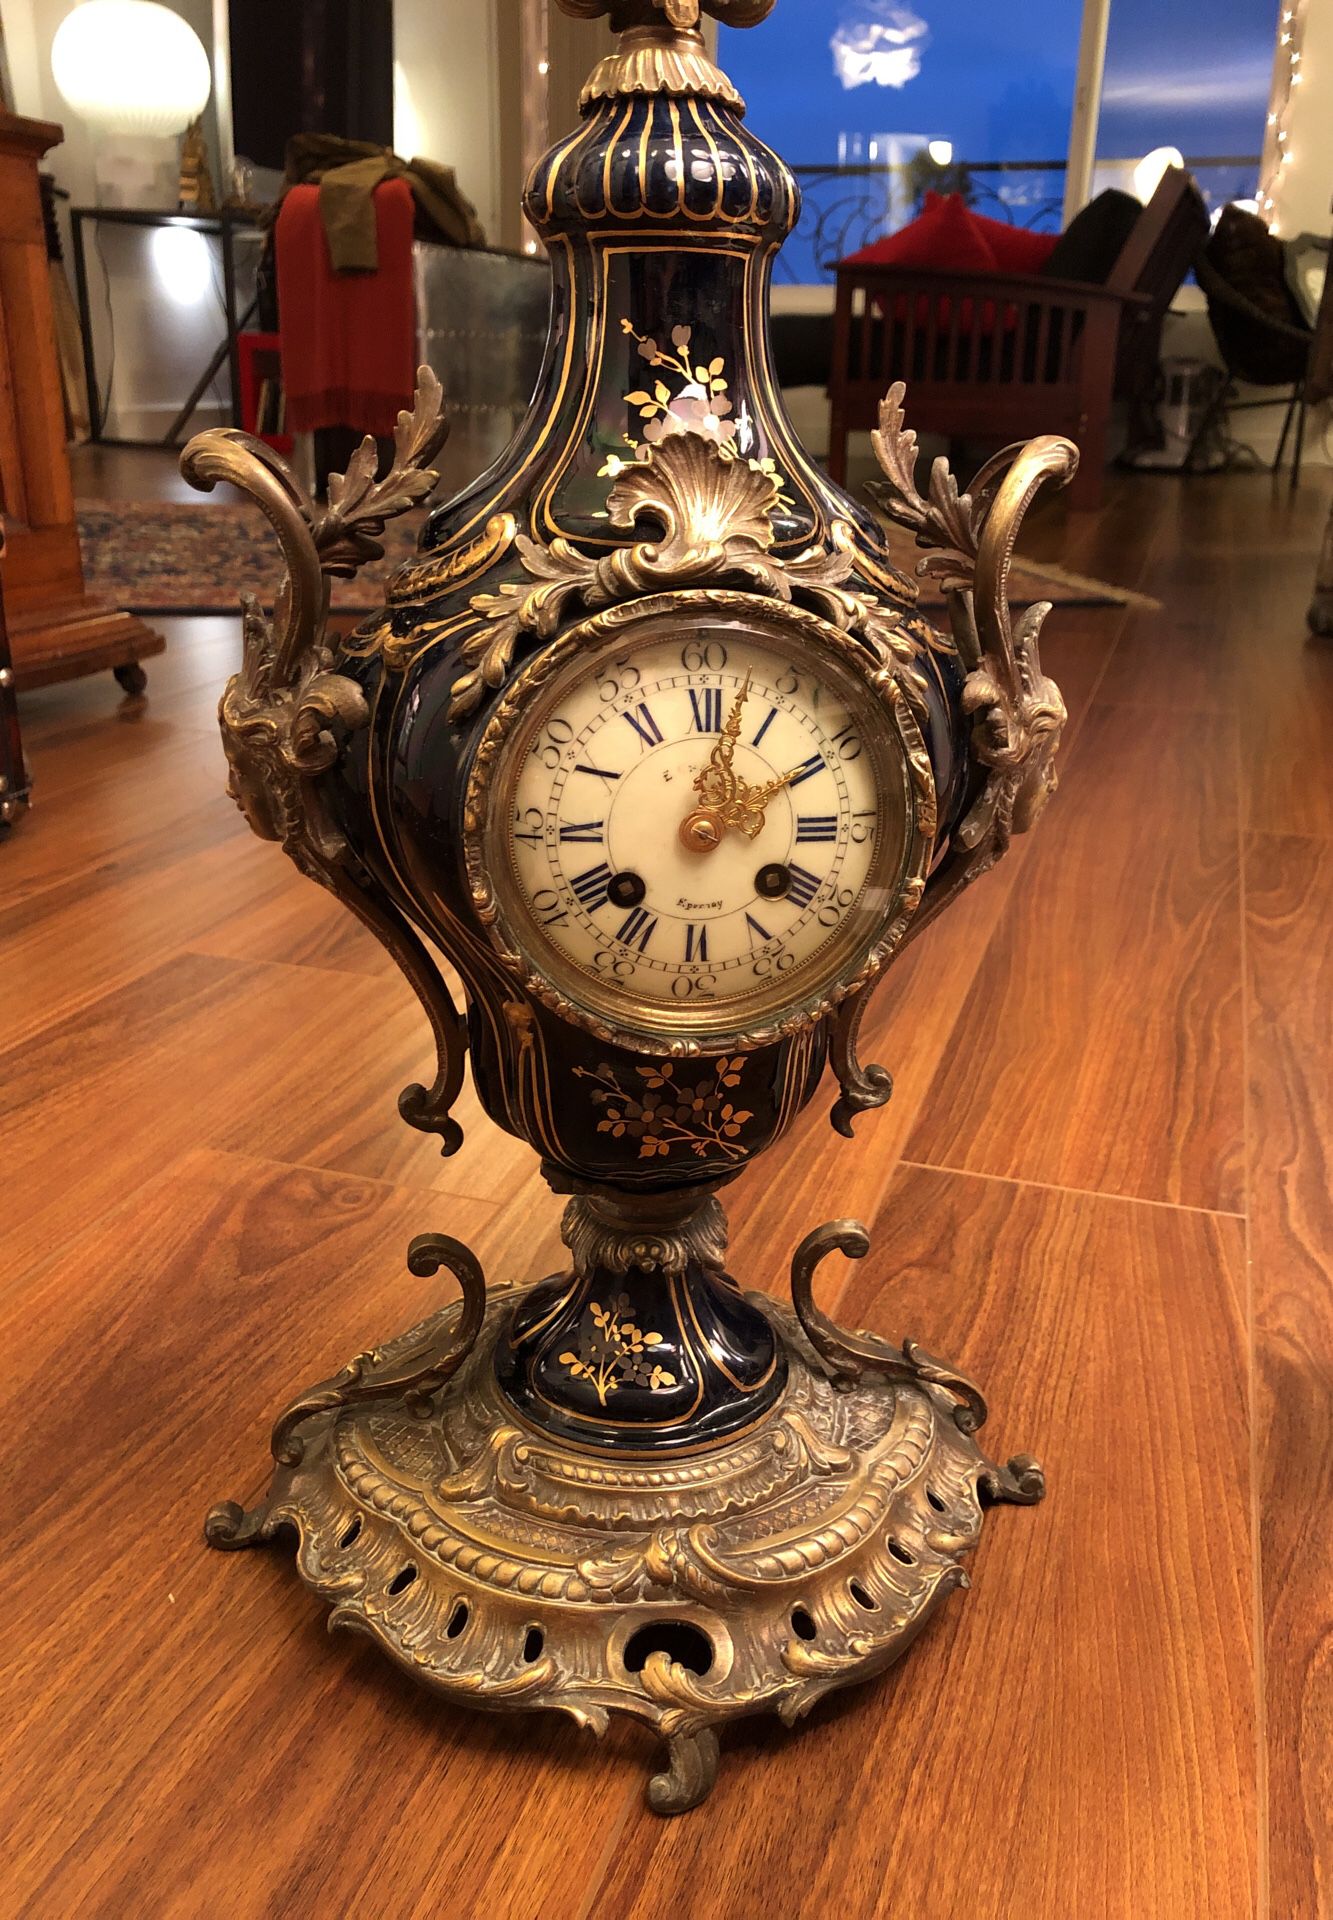 Rare Antique French Clock - E. Charles of Epernay